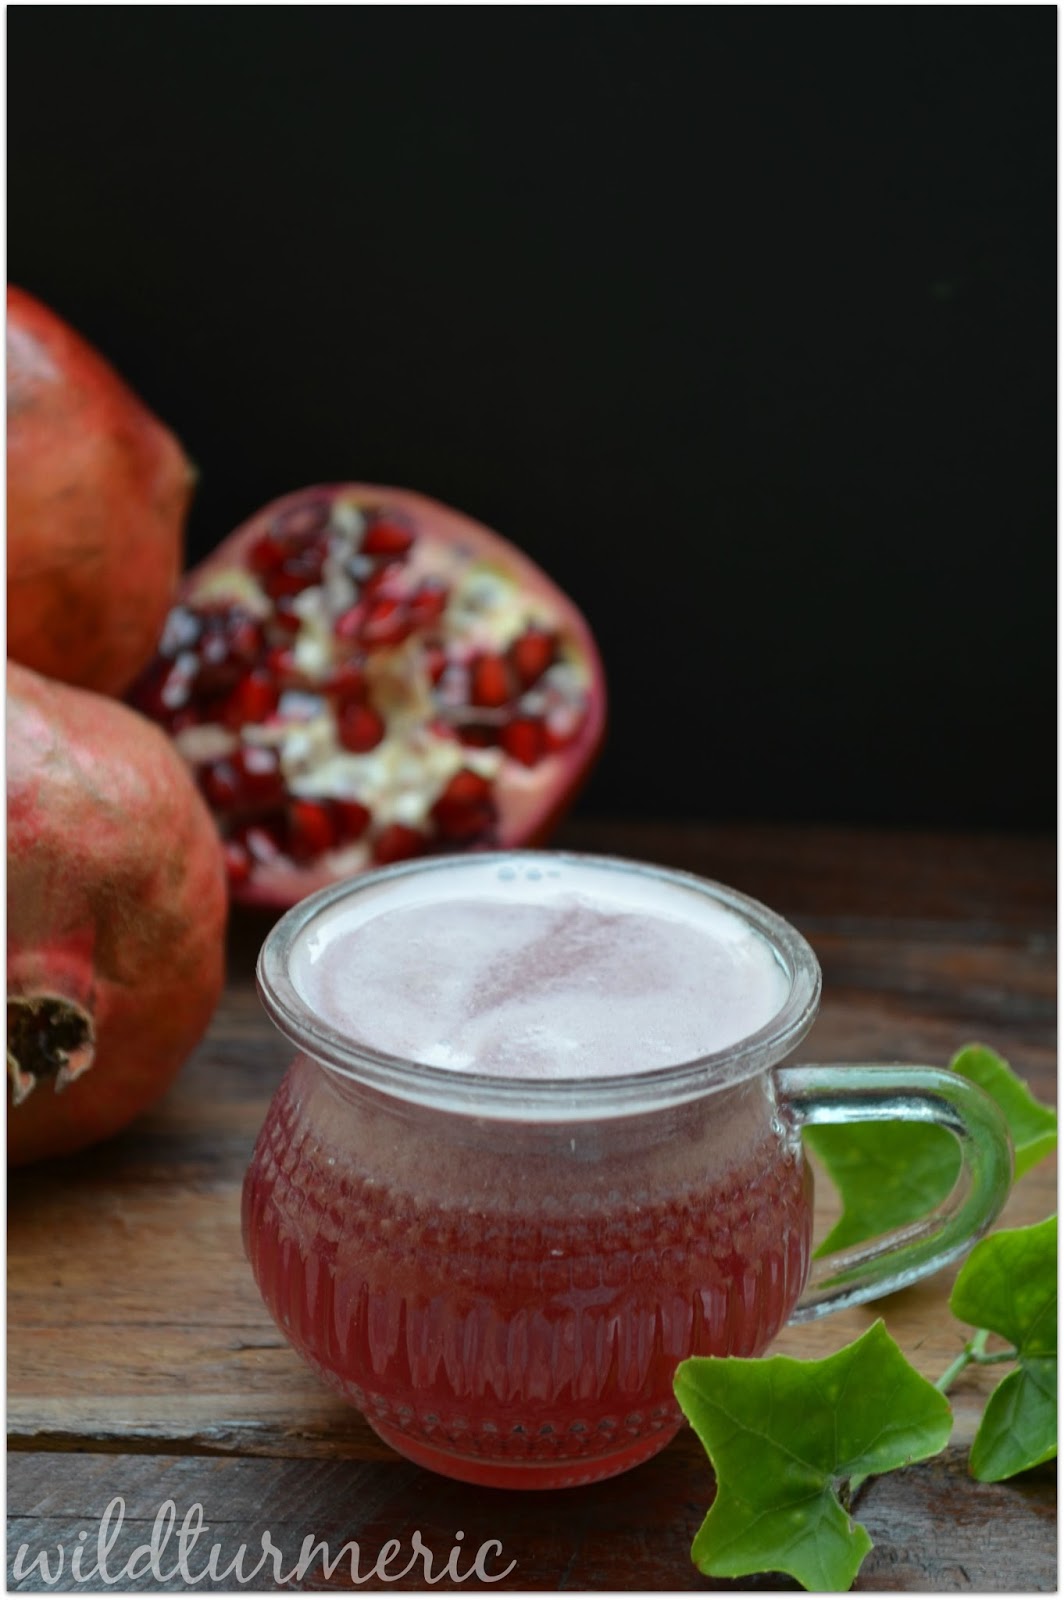 10 Best Health Benefits & Uses Of Pomegranate juice | Anar Juice For Skin, Weight Loss, Cancer & Babies